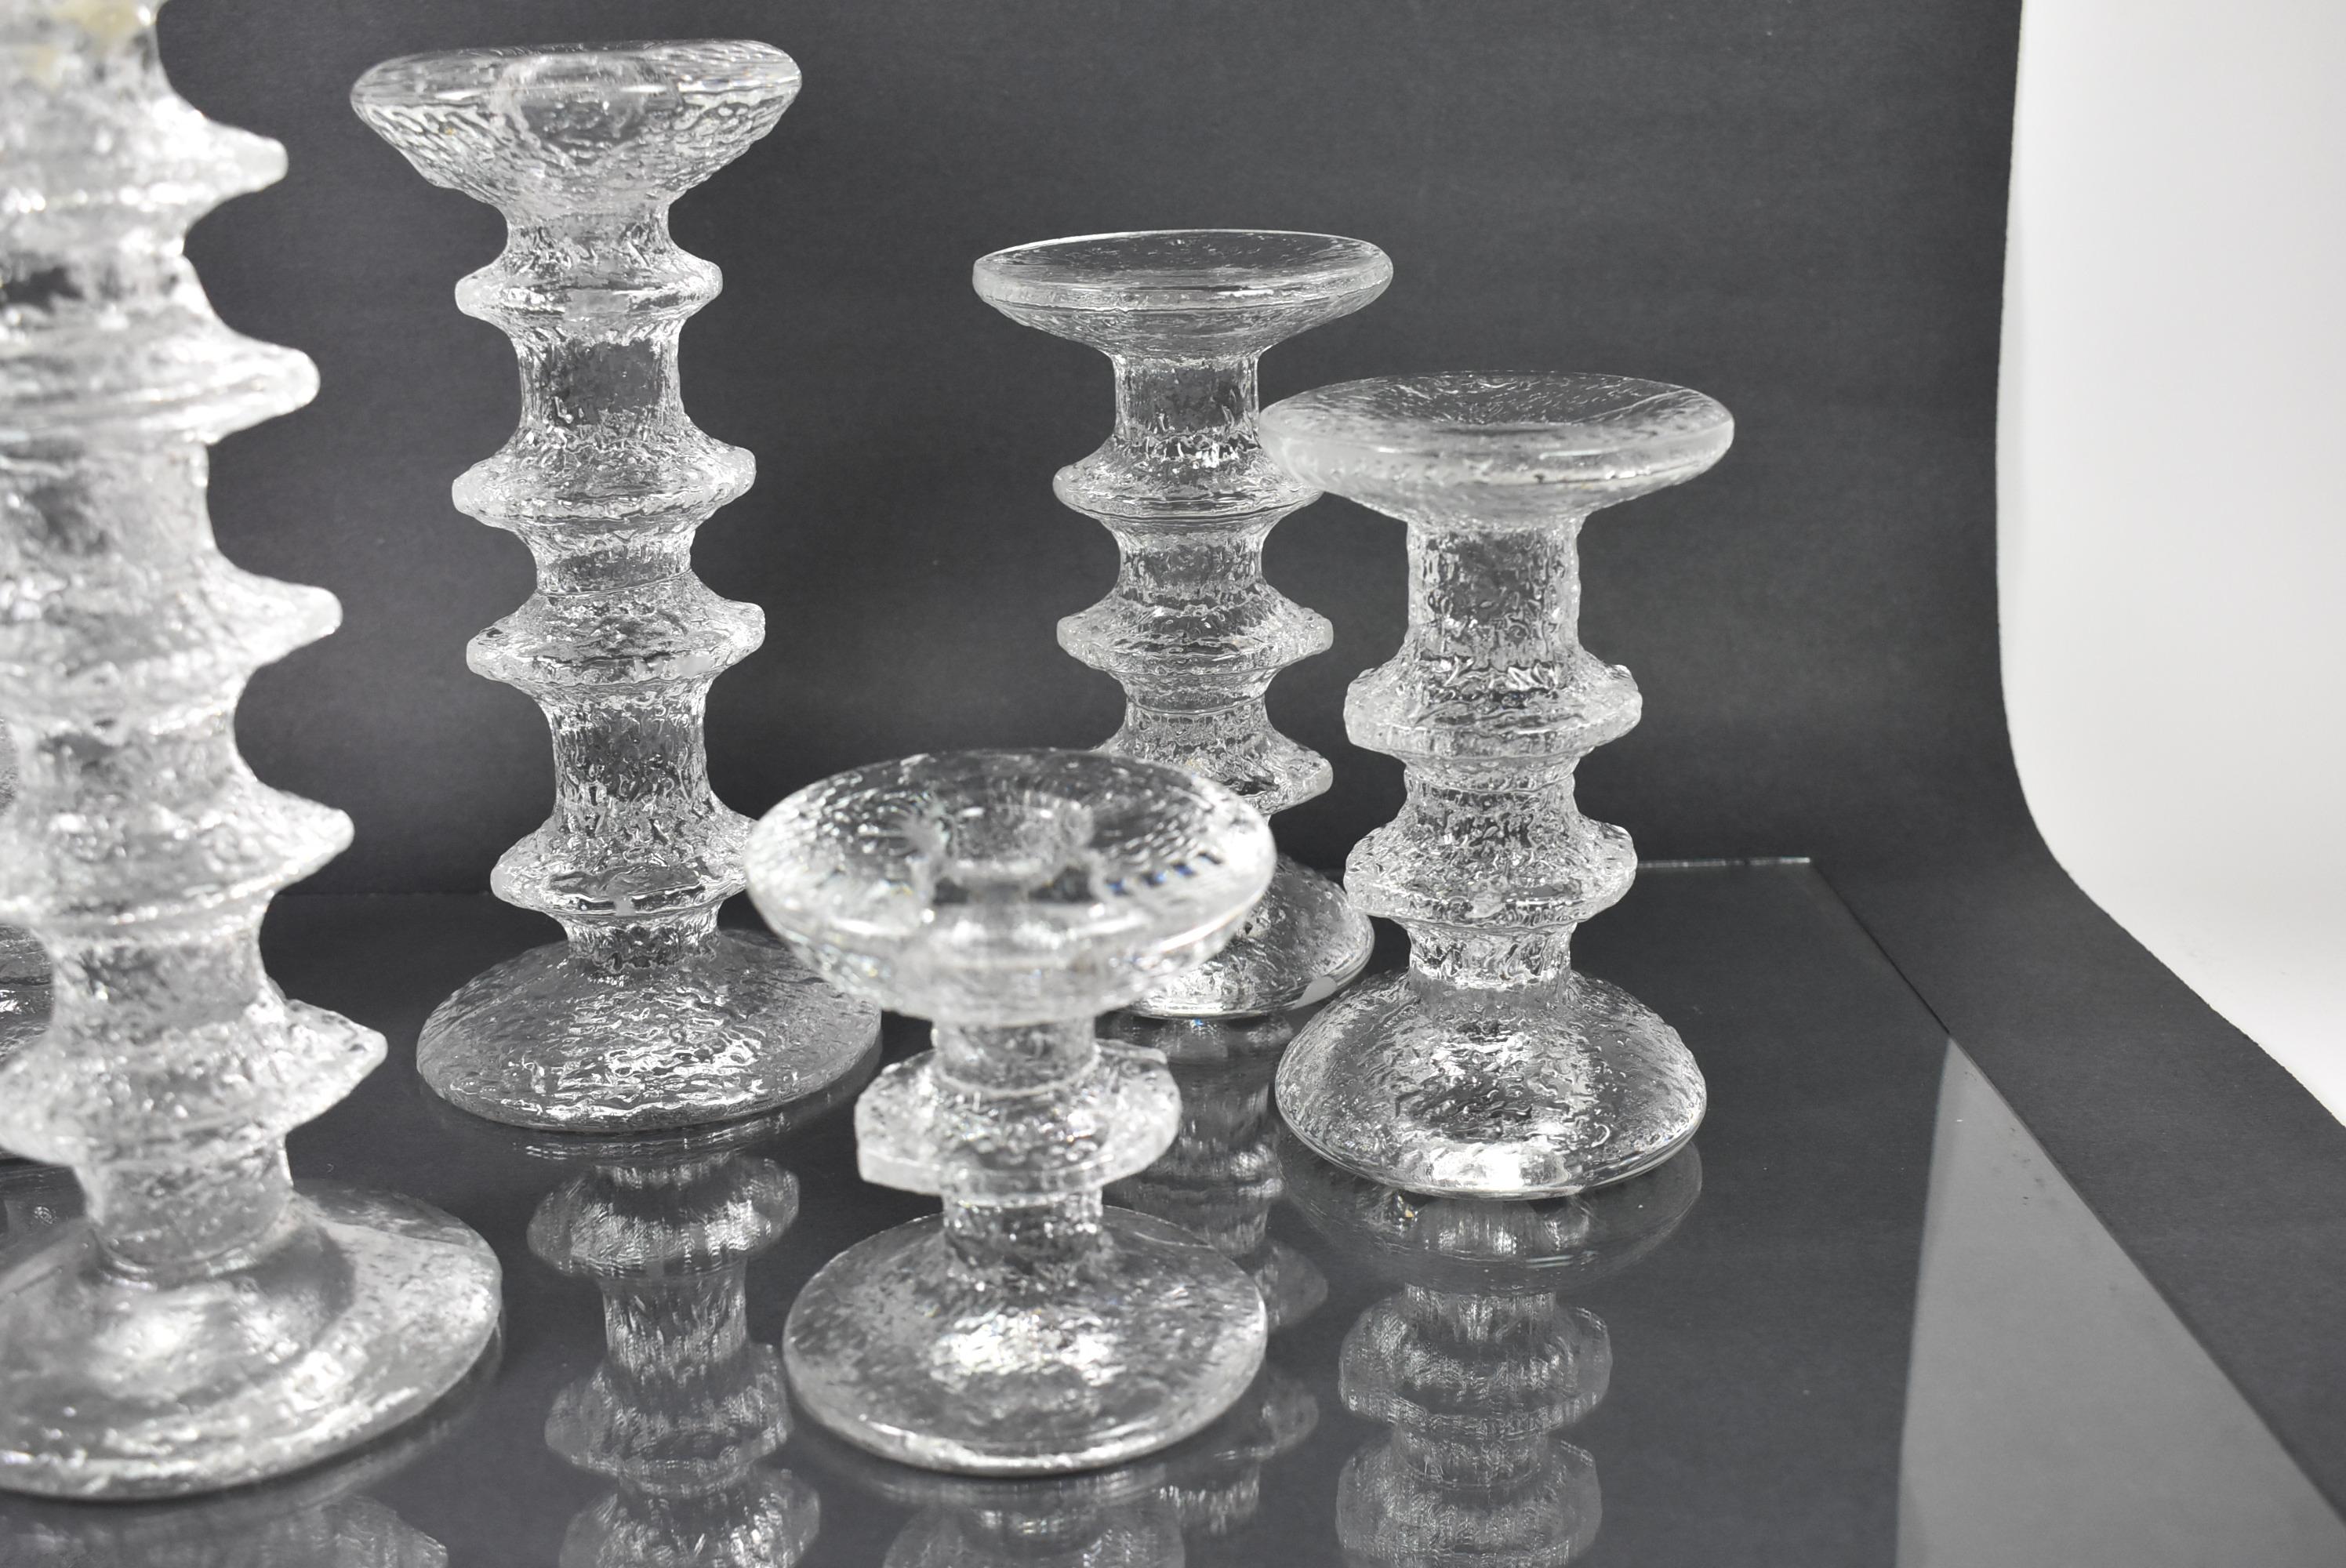 Six graduated size glass candlesticks by Timo Sarpaneva 1926-2006. Part of the Littala Festivo Collection. Sizes range from 2.5